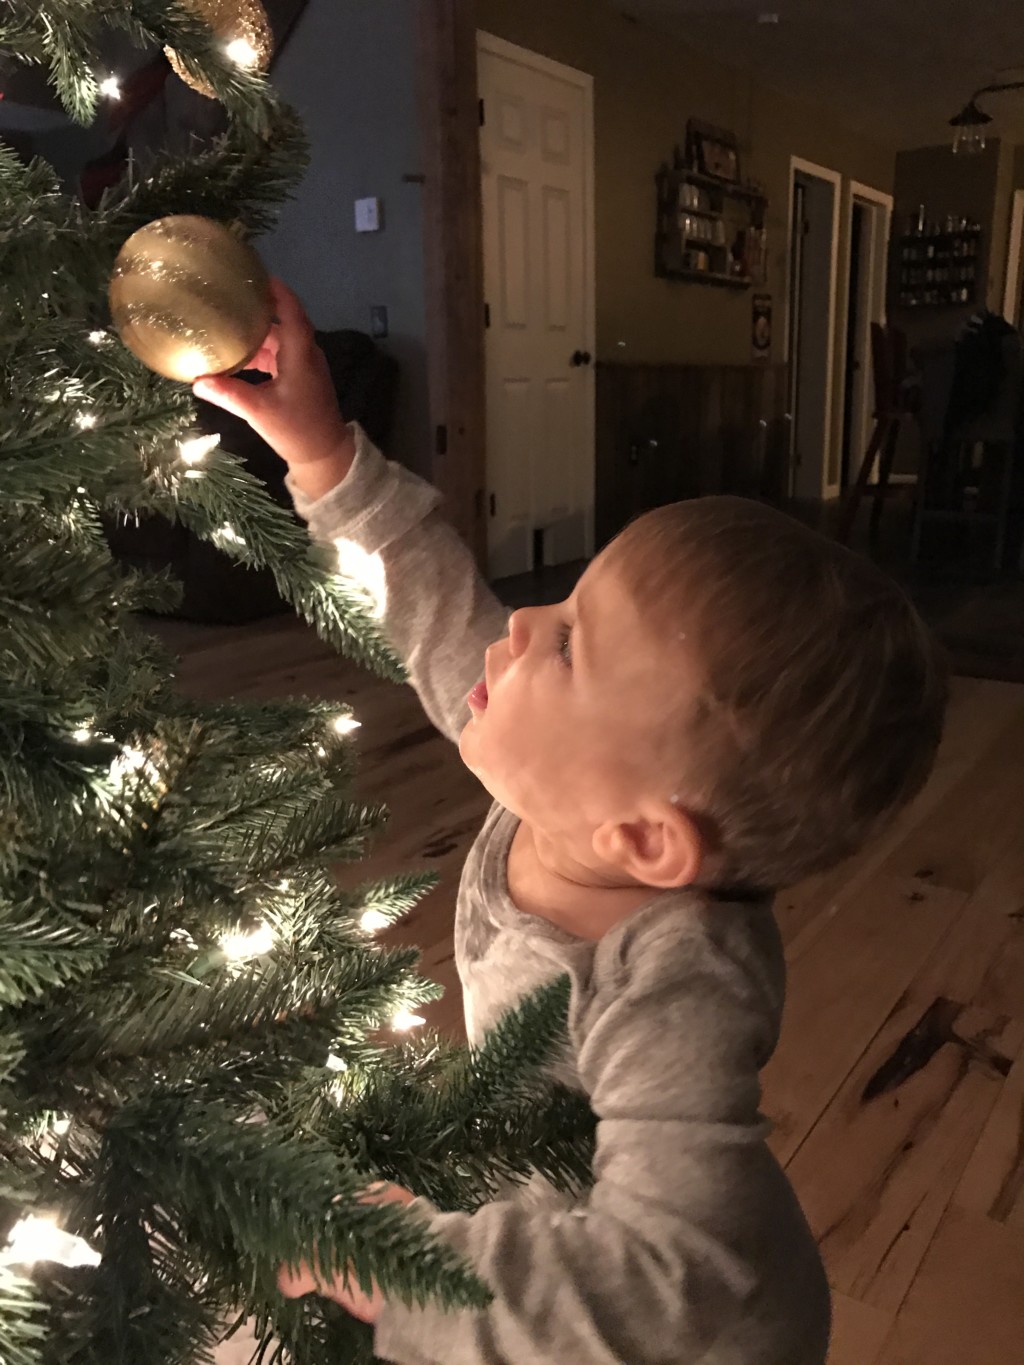 Child reaching for Christmas ornaments on Christmas tree